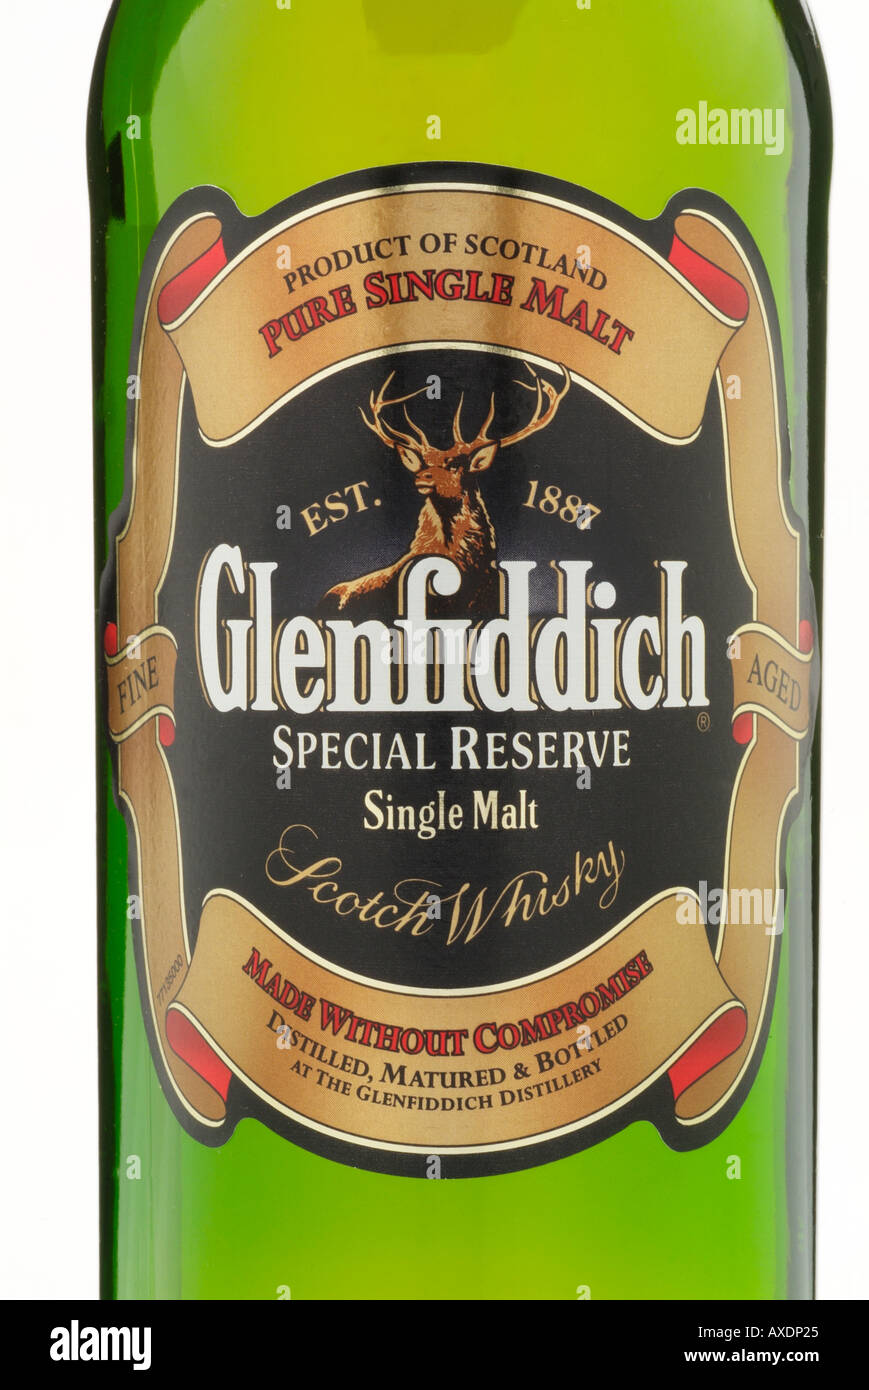 product of scotland pure single malt glenfiddich special reserve single malt scotch whisky whiskey matured 12 years Stock Photo